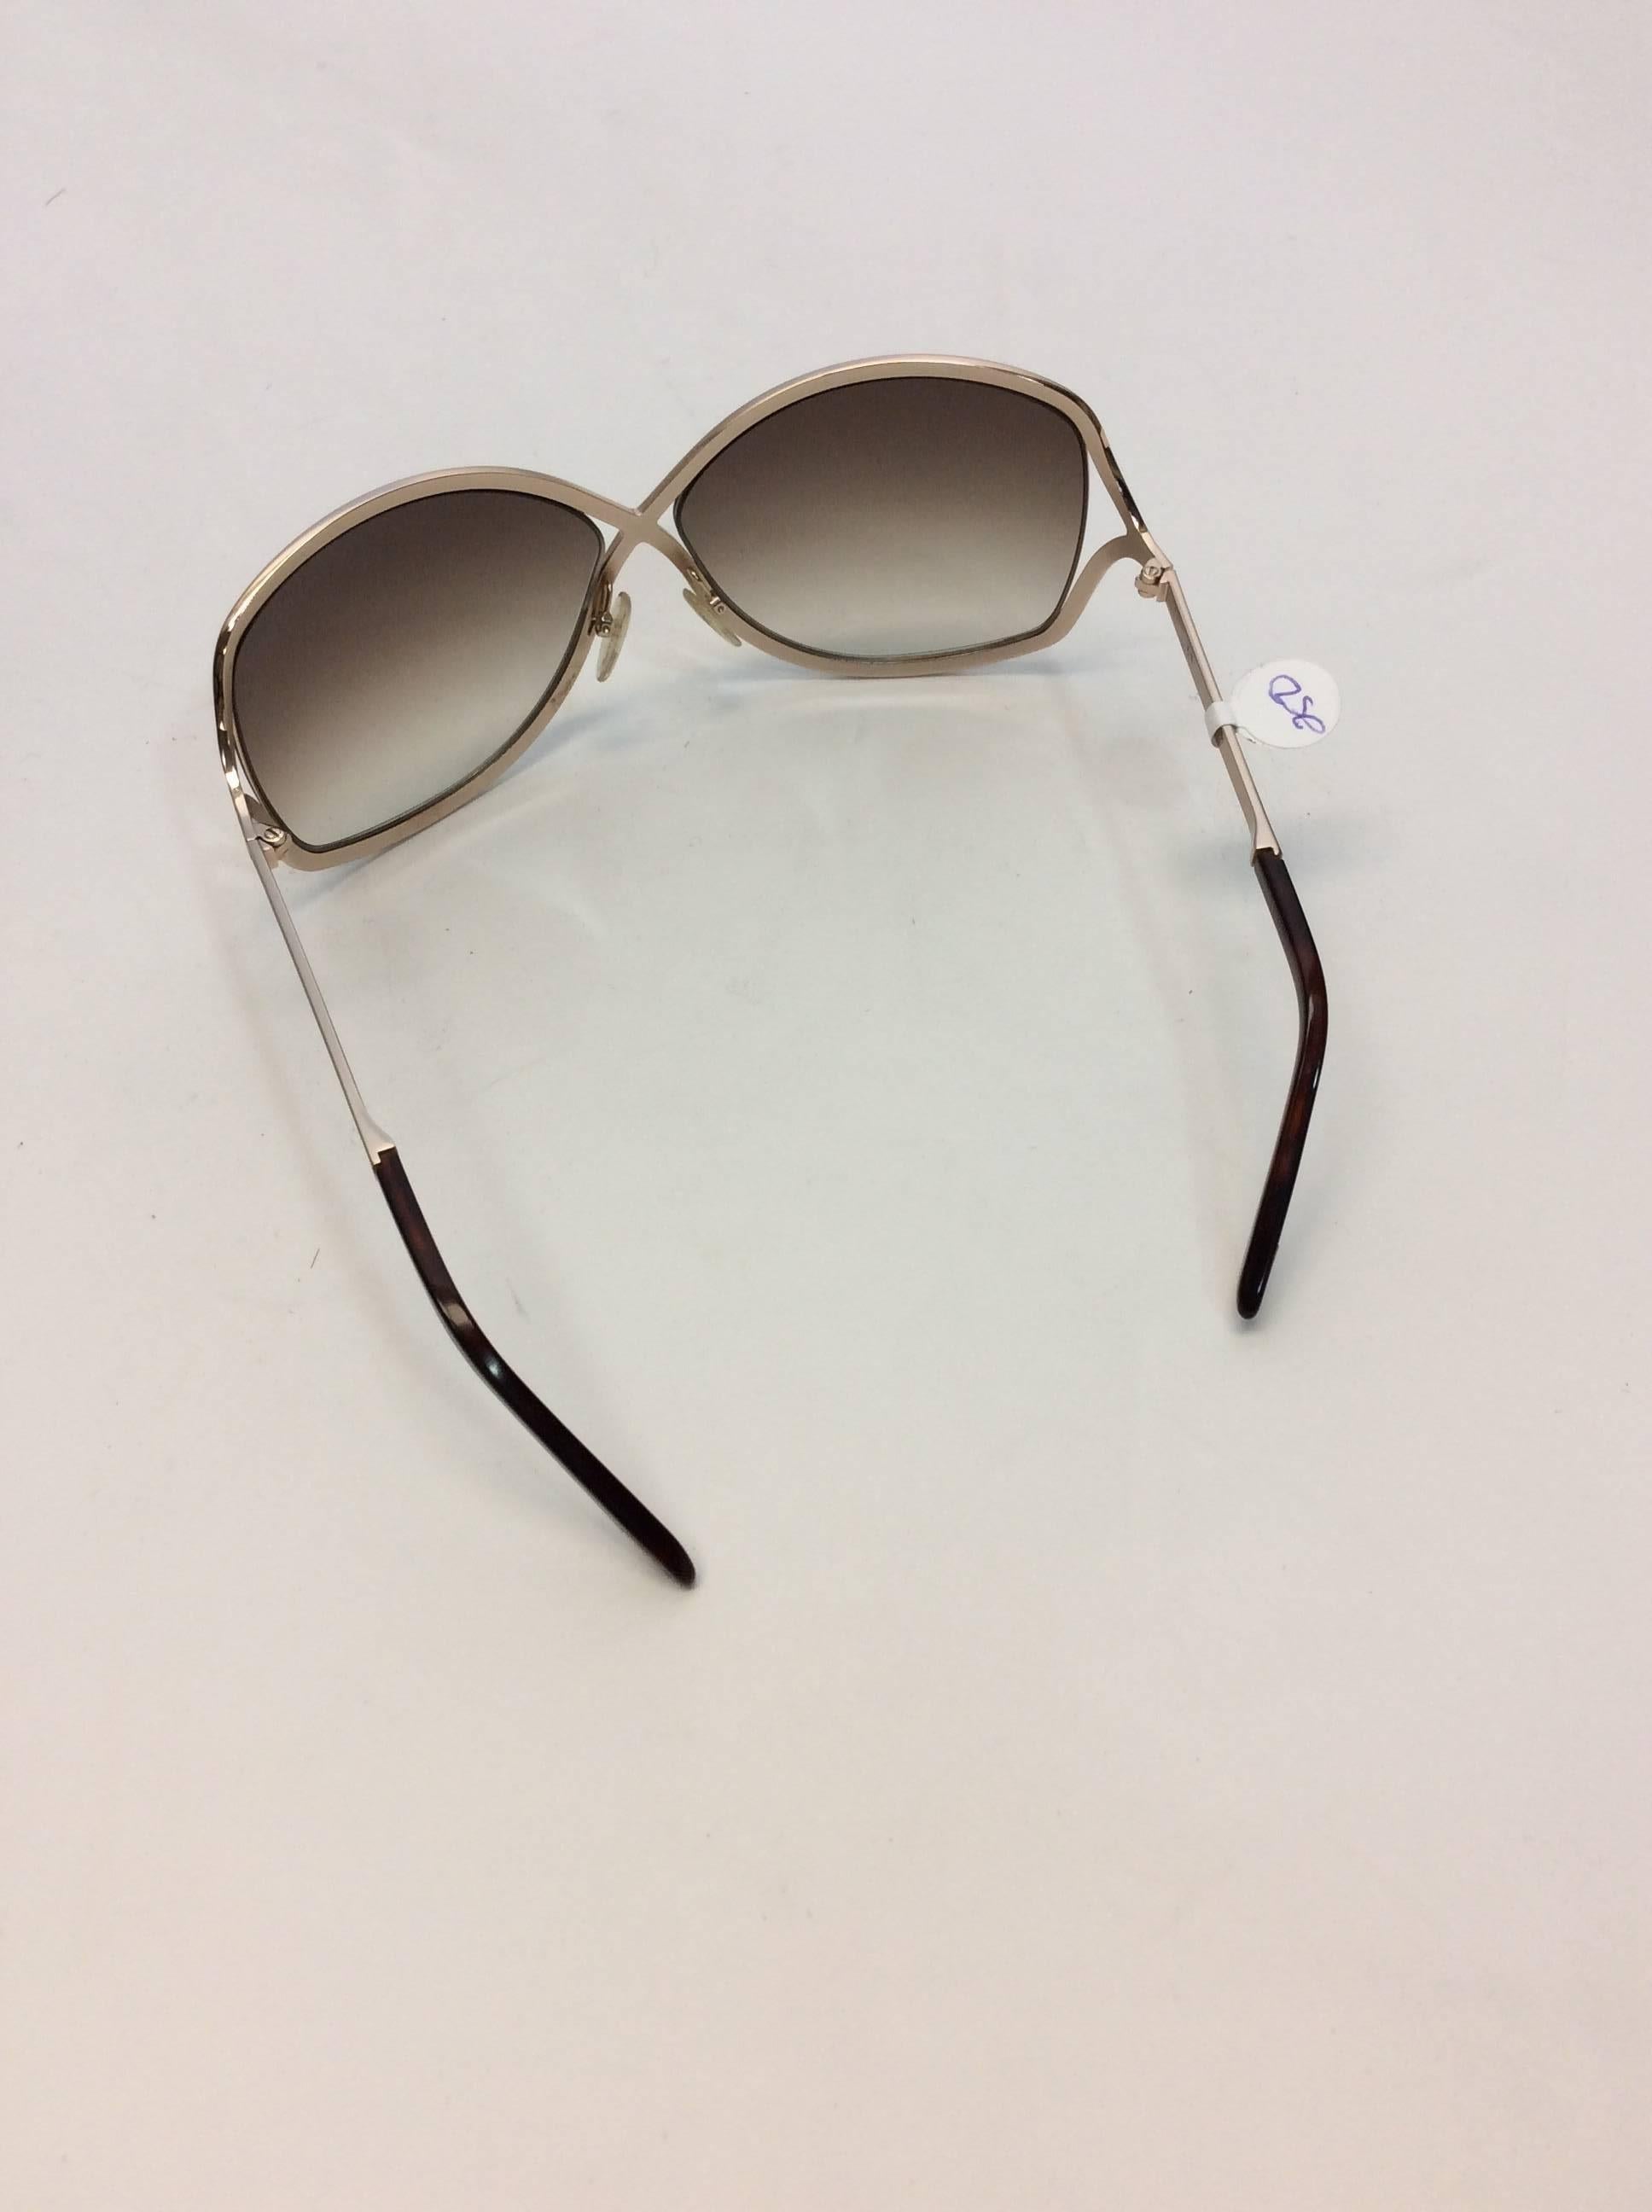 Tom Ford Oversized Soft Round Sunglasses In Excellent Condition For Sale In Narberth, PA